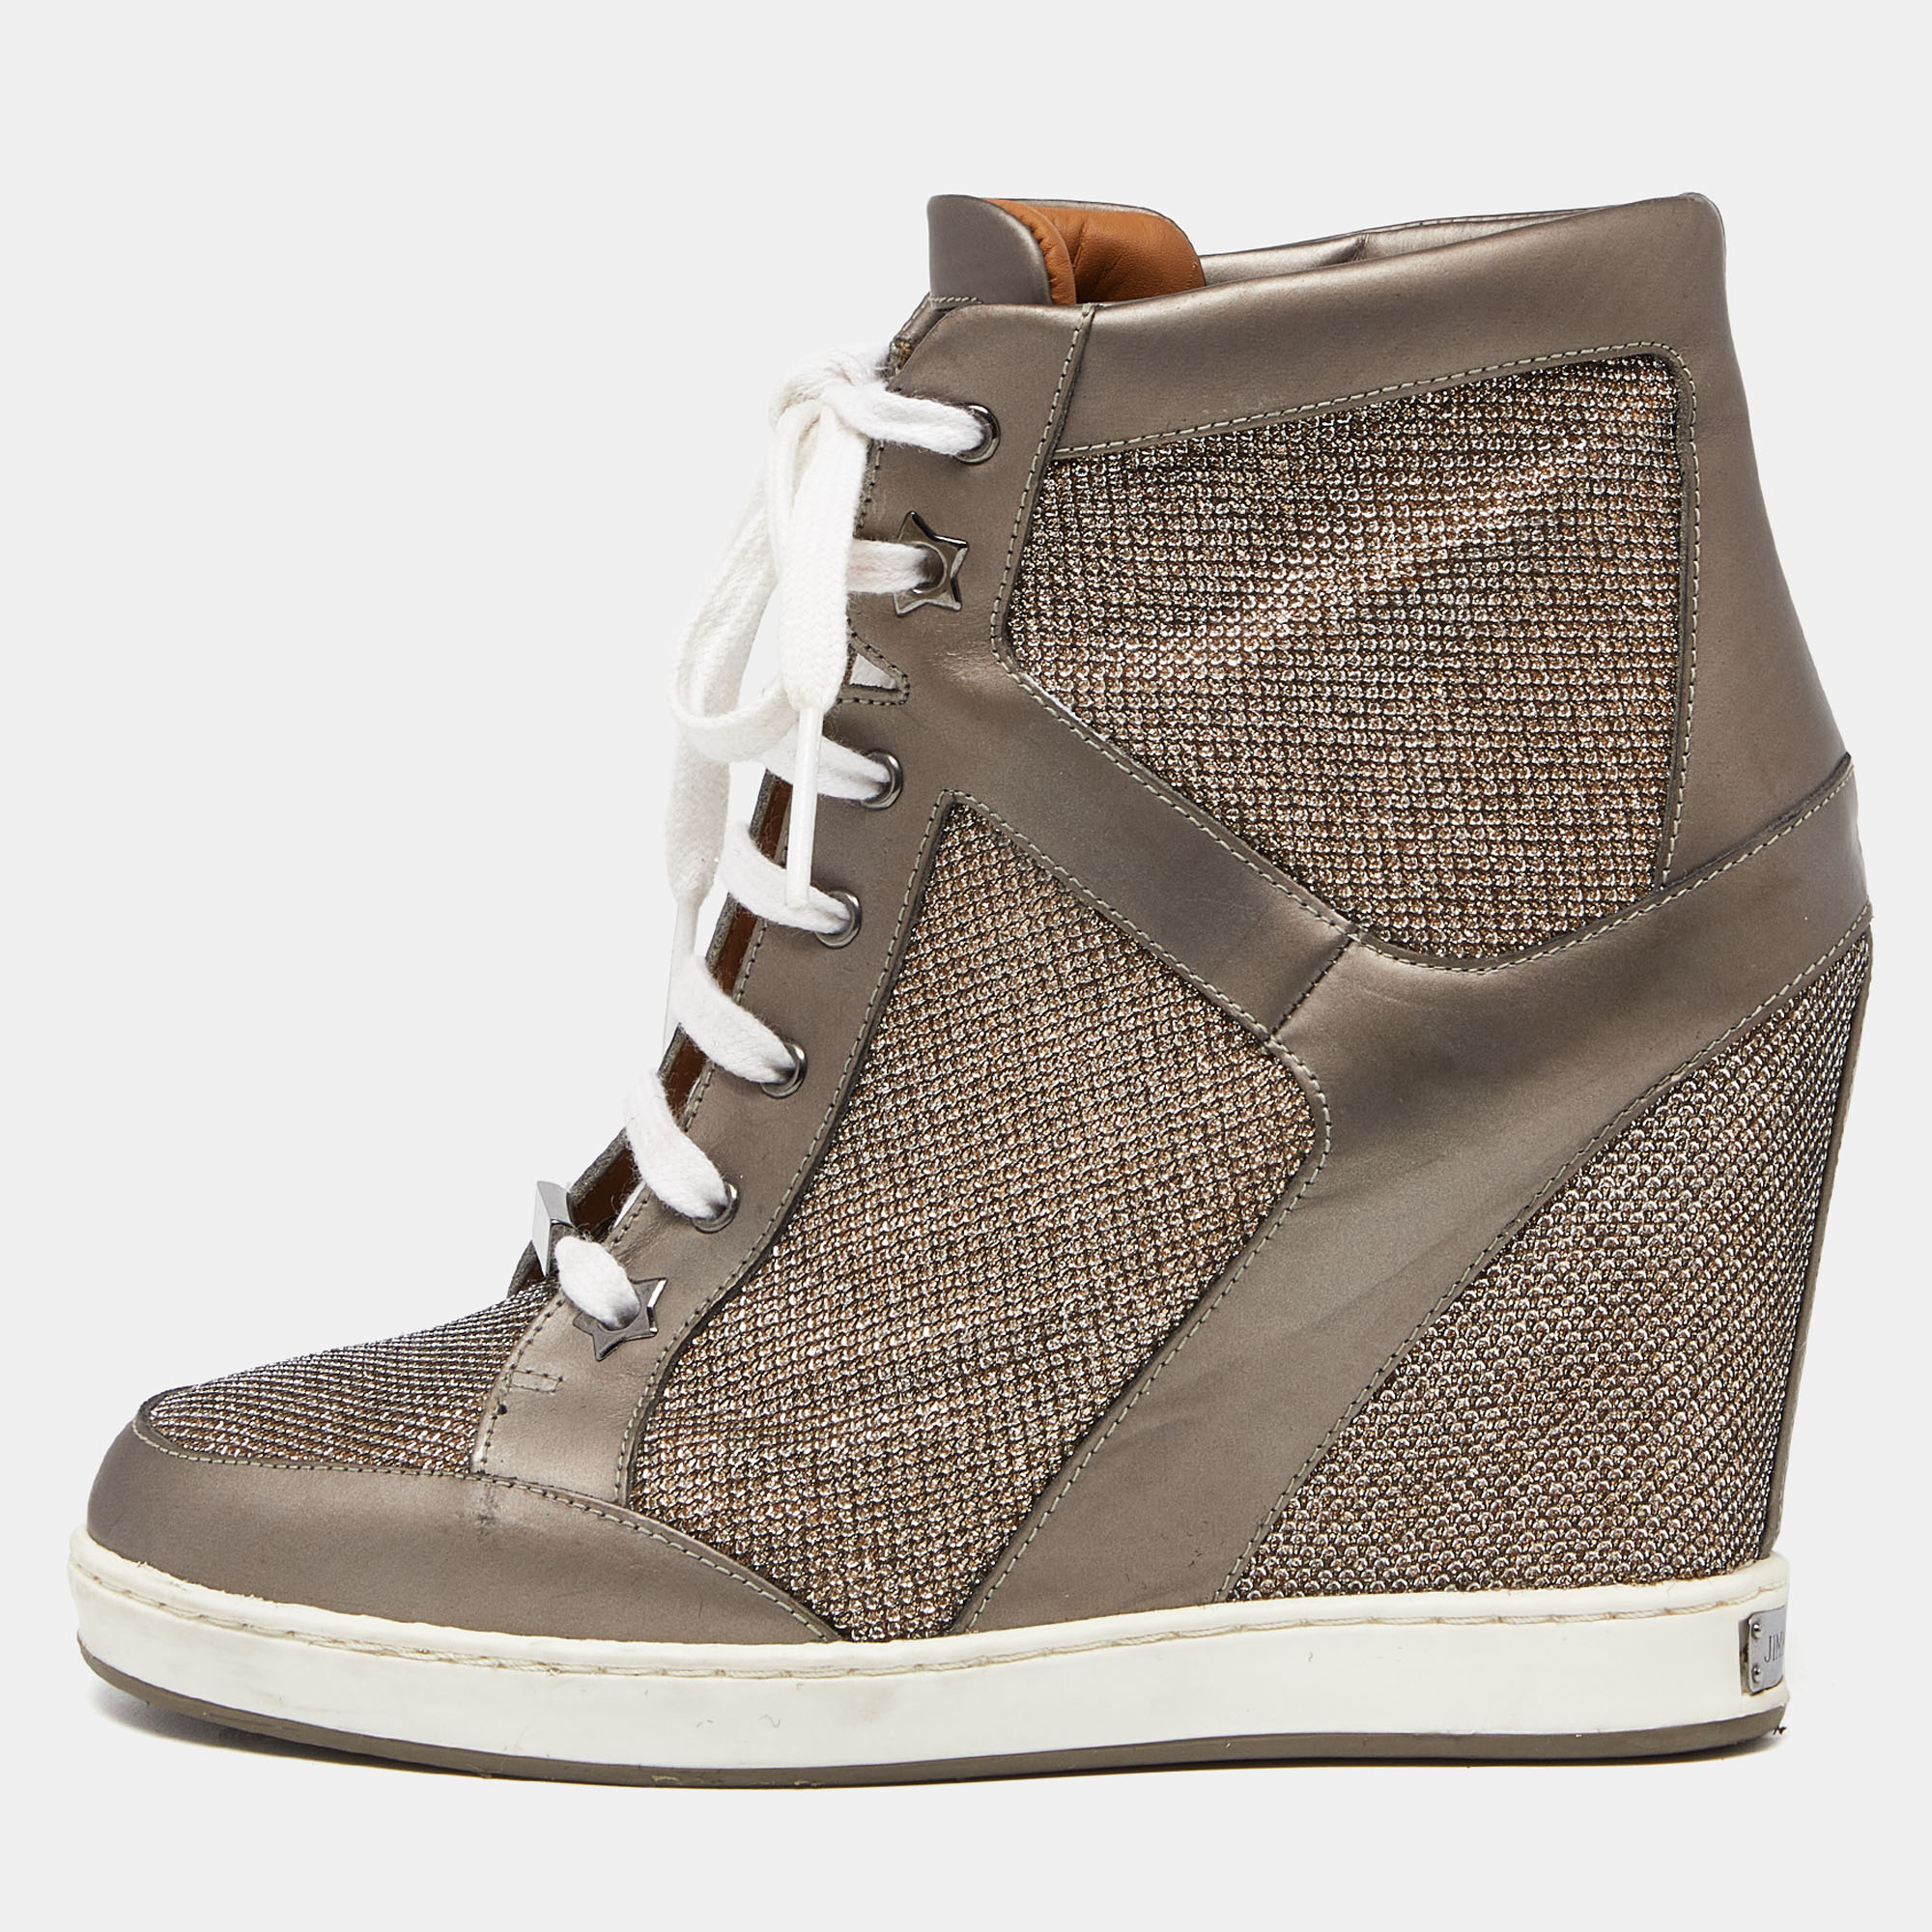 Upgrade your style with these Jimmy Choo wedge sneakers. Meticulously designed for fashion and comfort theyre the ideal choice for a trendy and comfortable stride.